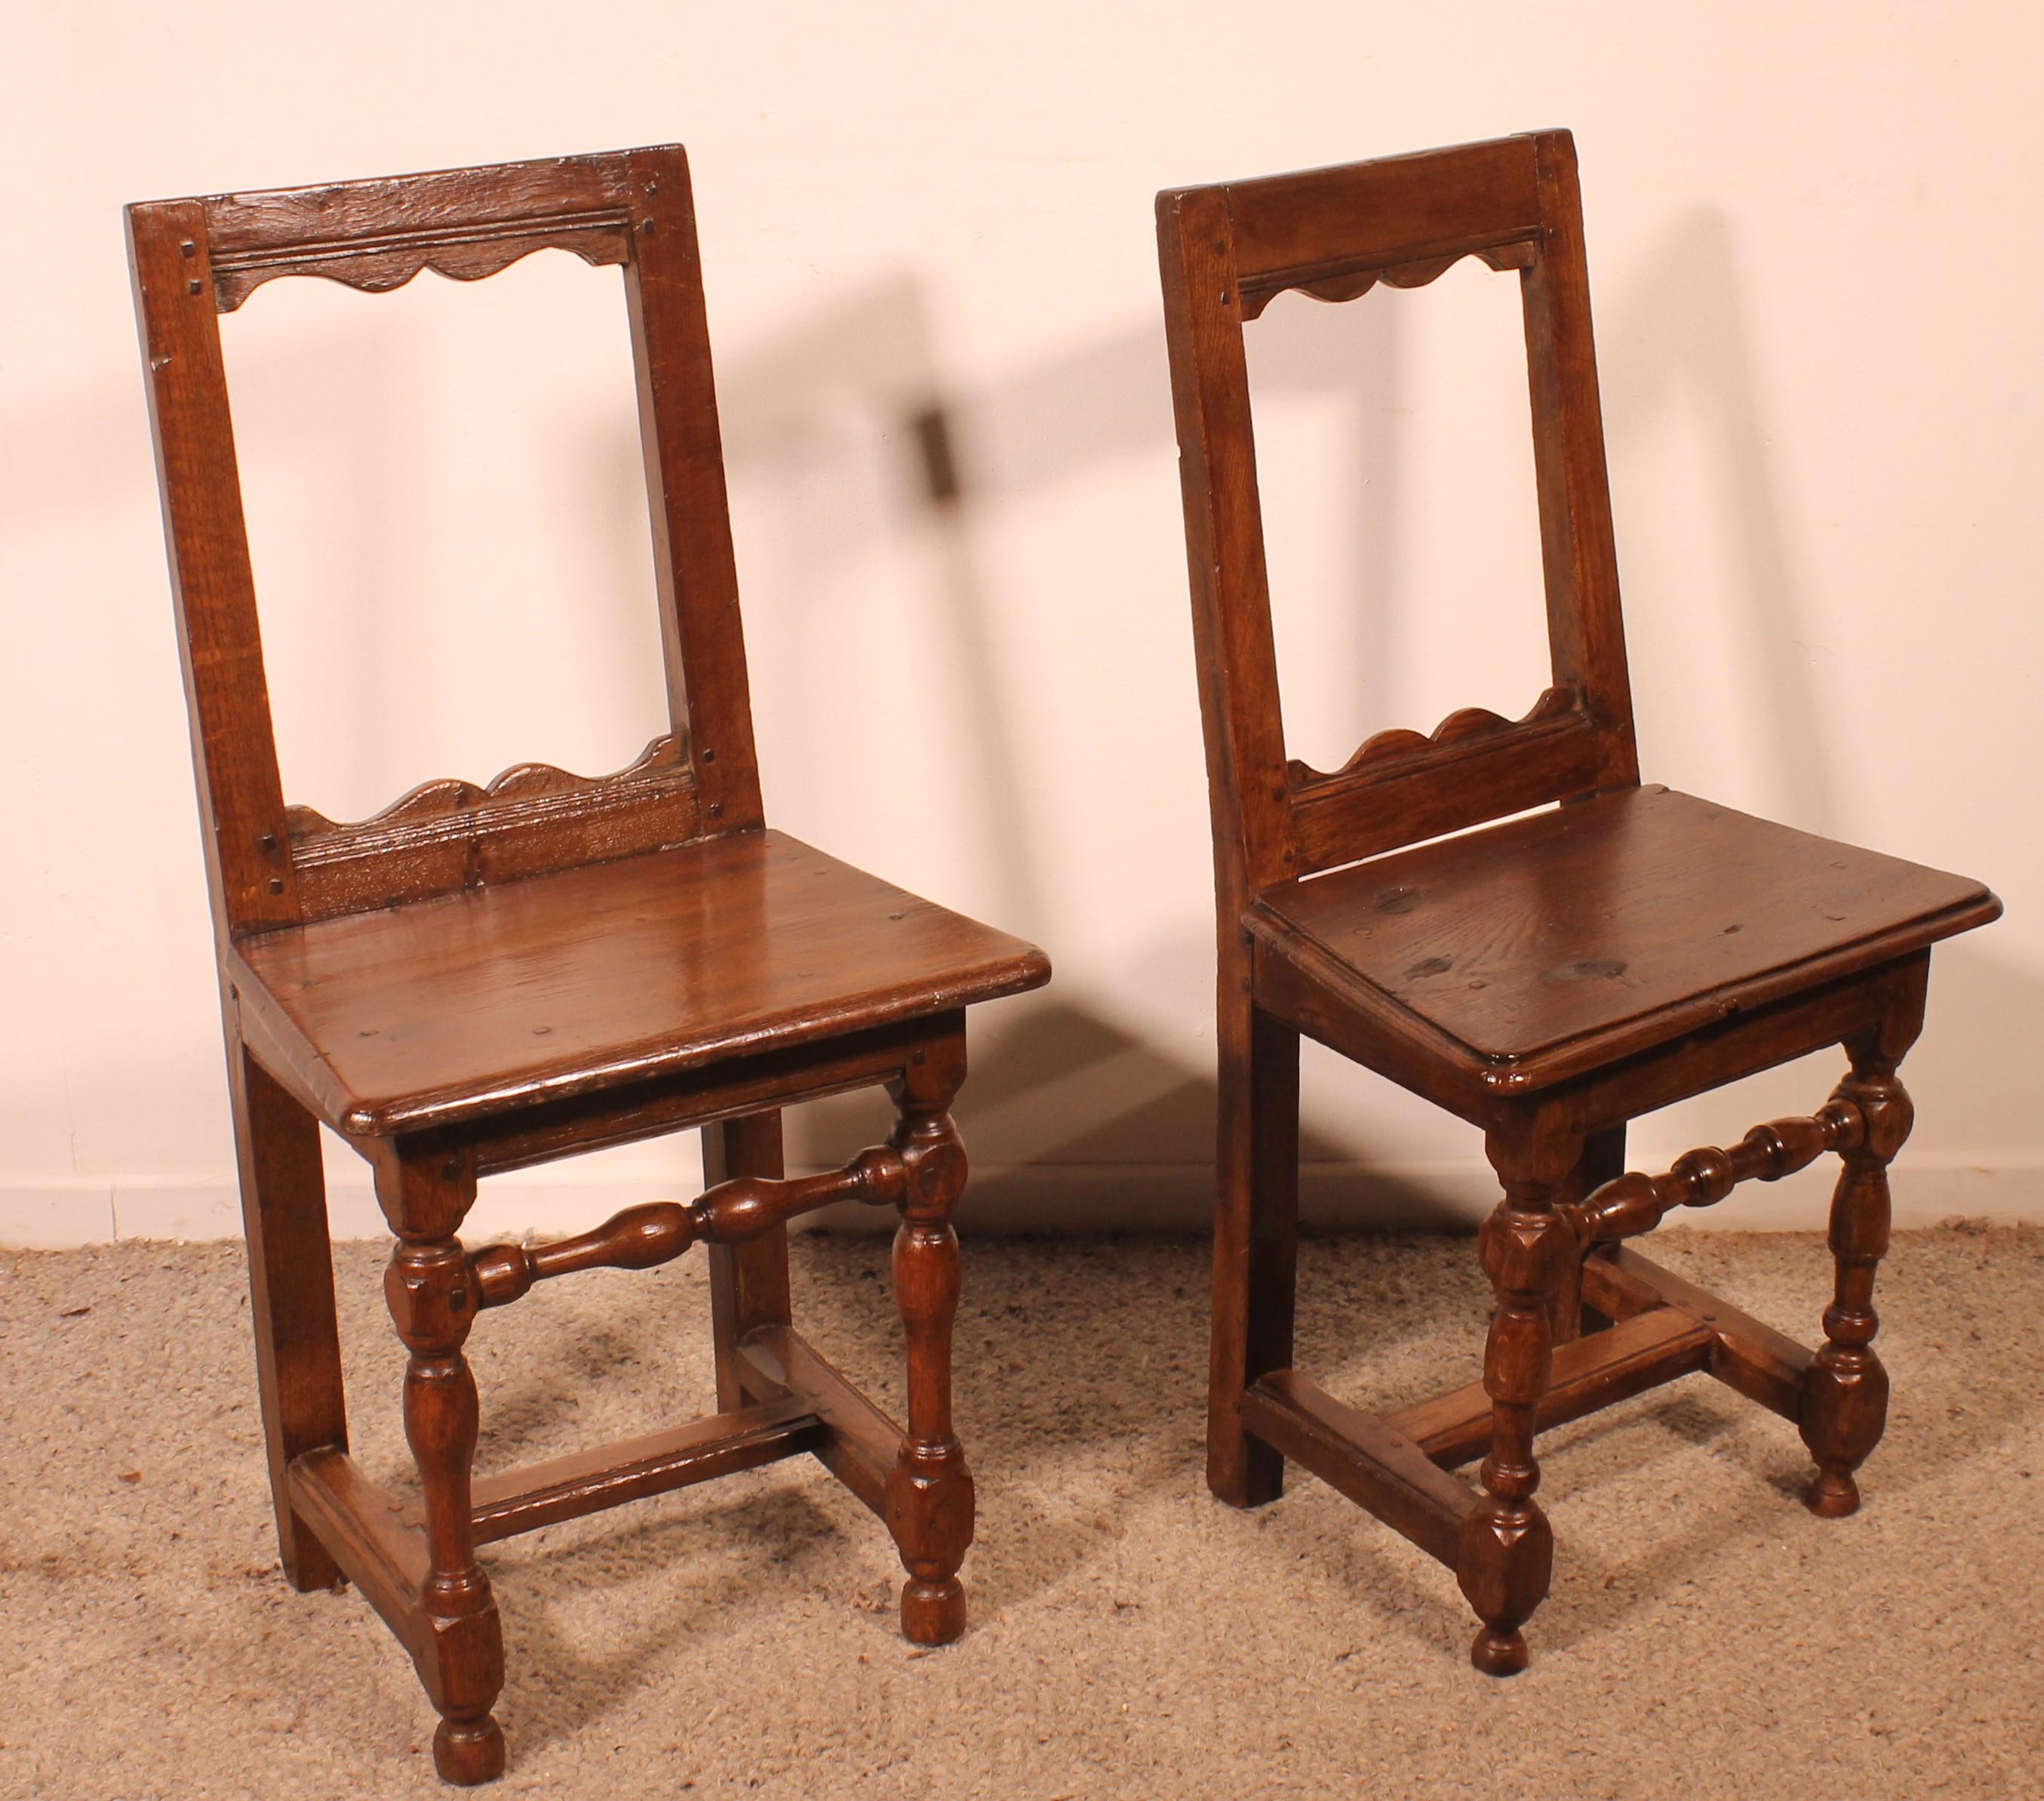 French Set Of 4 Lorraine Chairs From The 18th Century In Oak For Sale